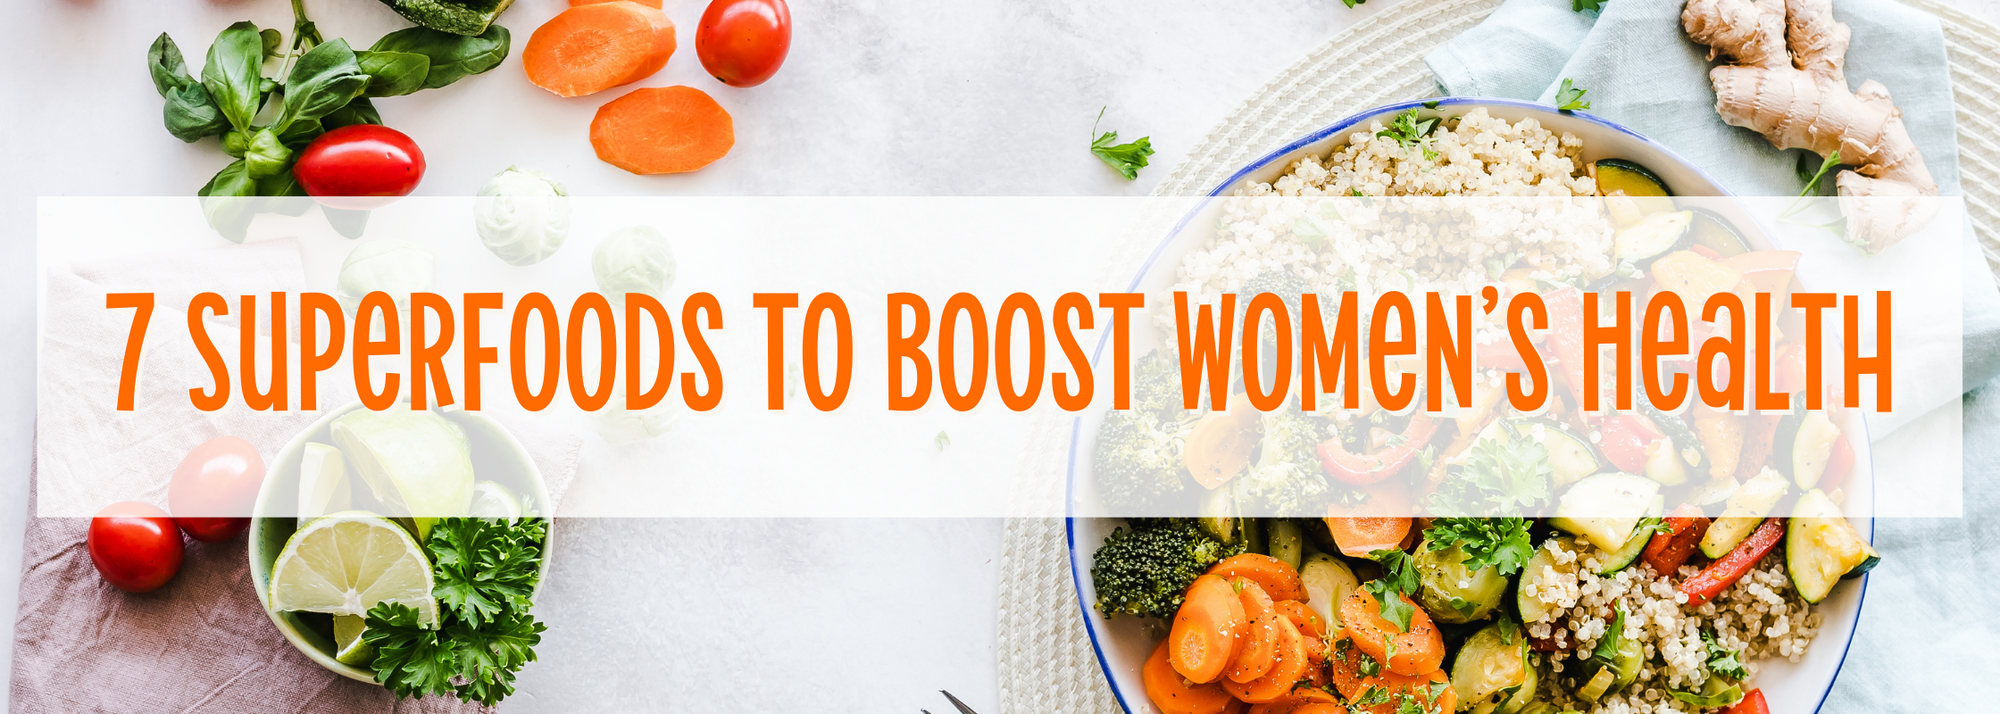 7 Superfoods to Boost Women’s Health